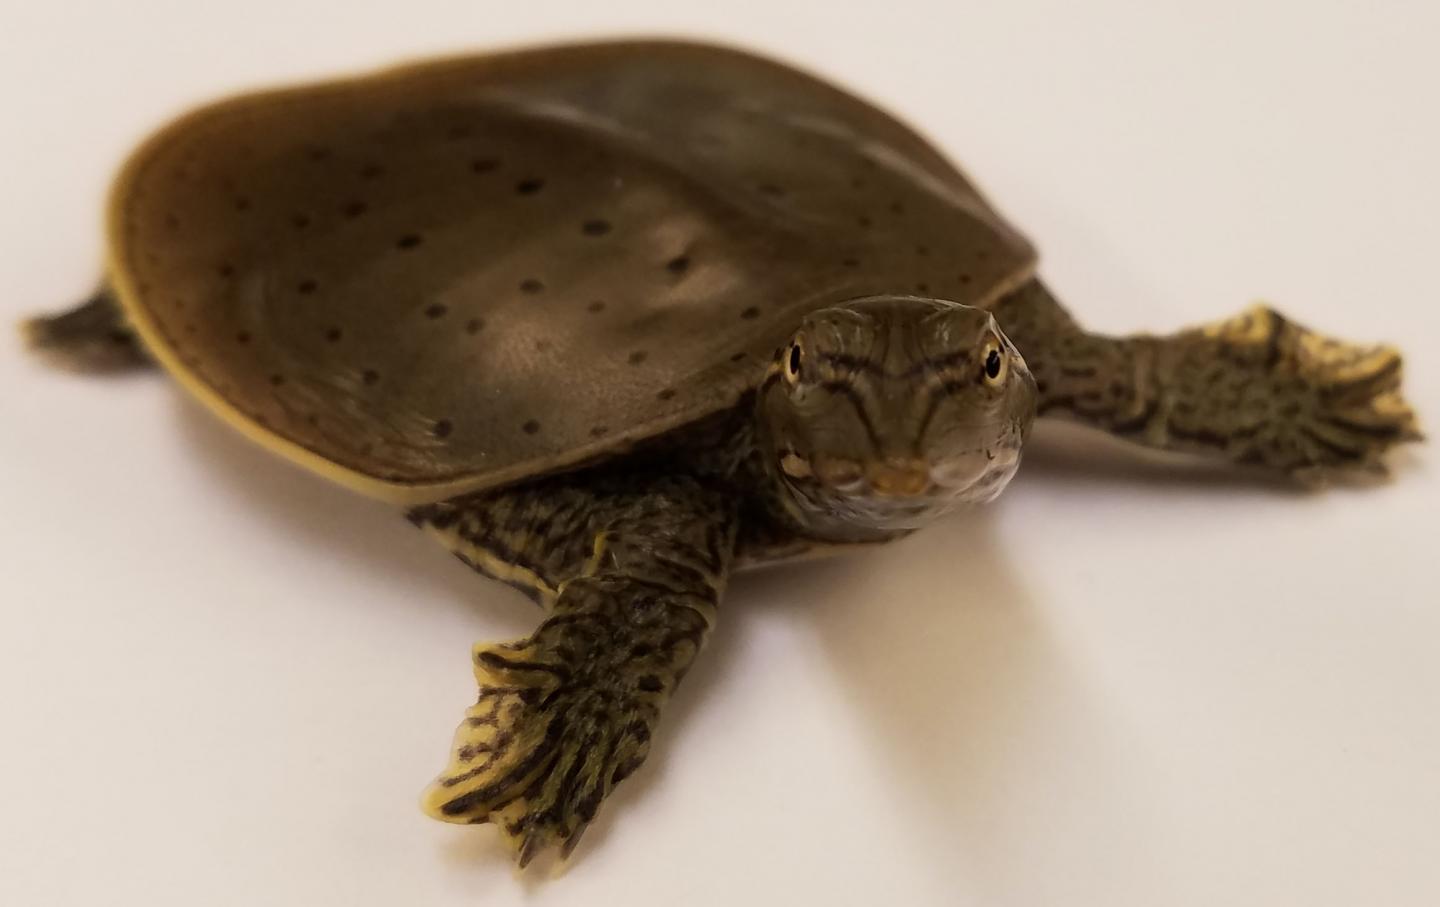 New study sheds light on function of sex chromosomes in turtles